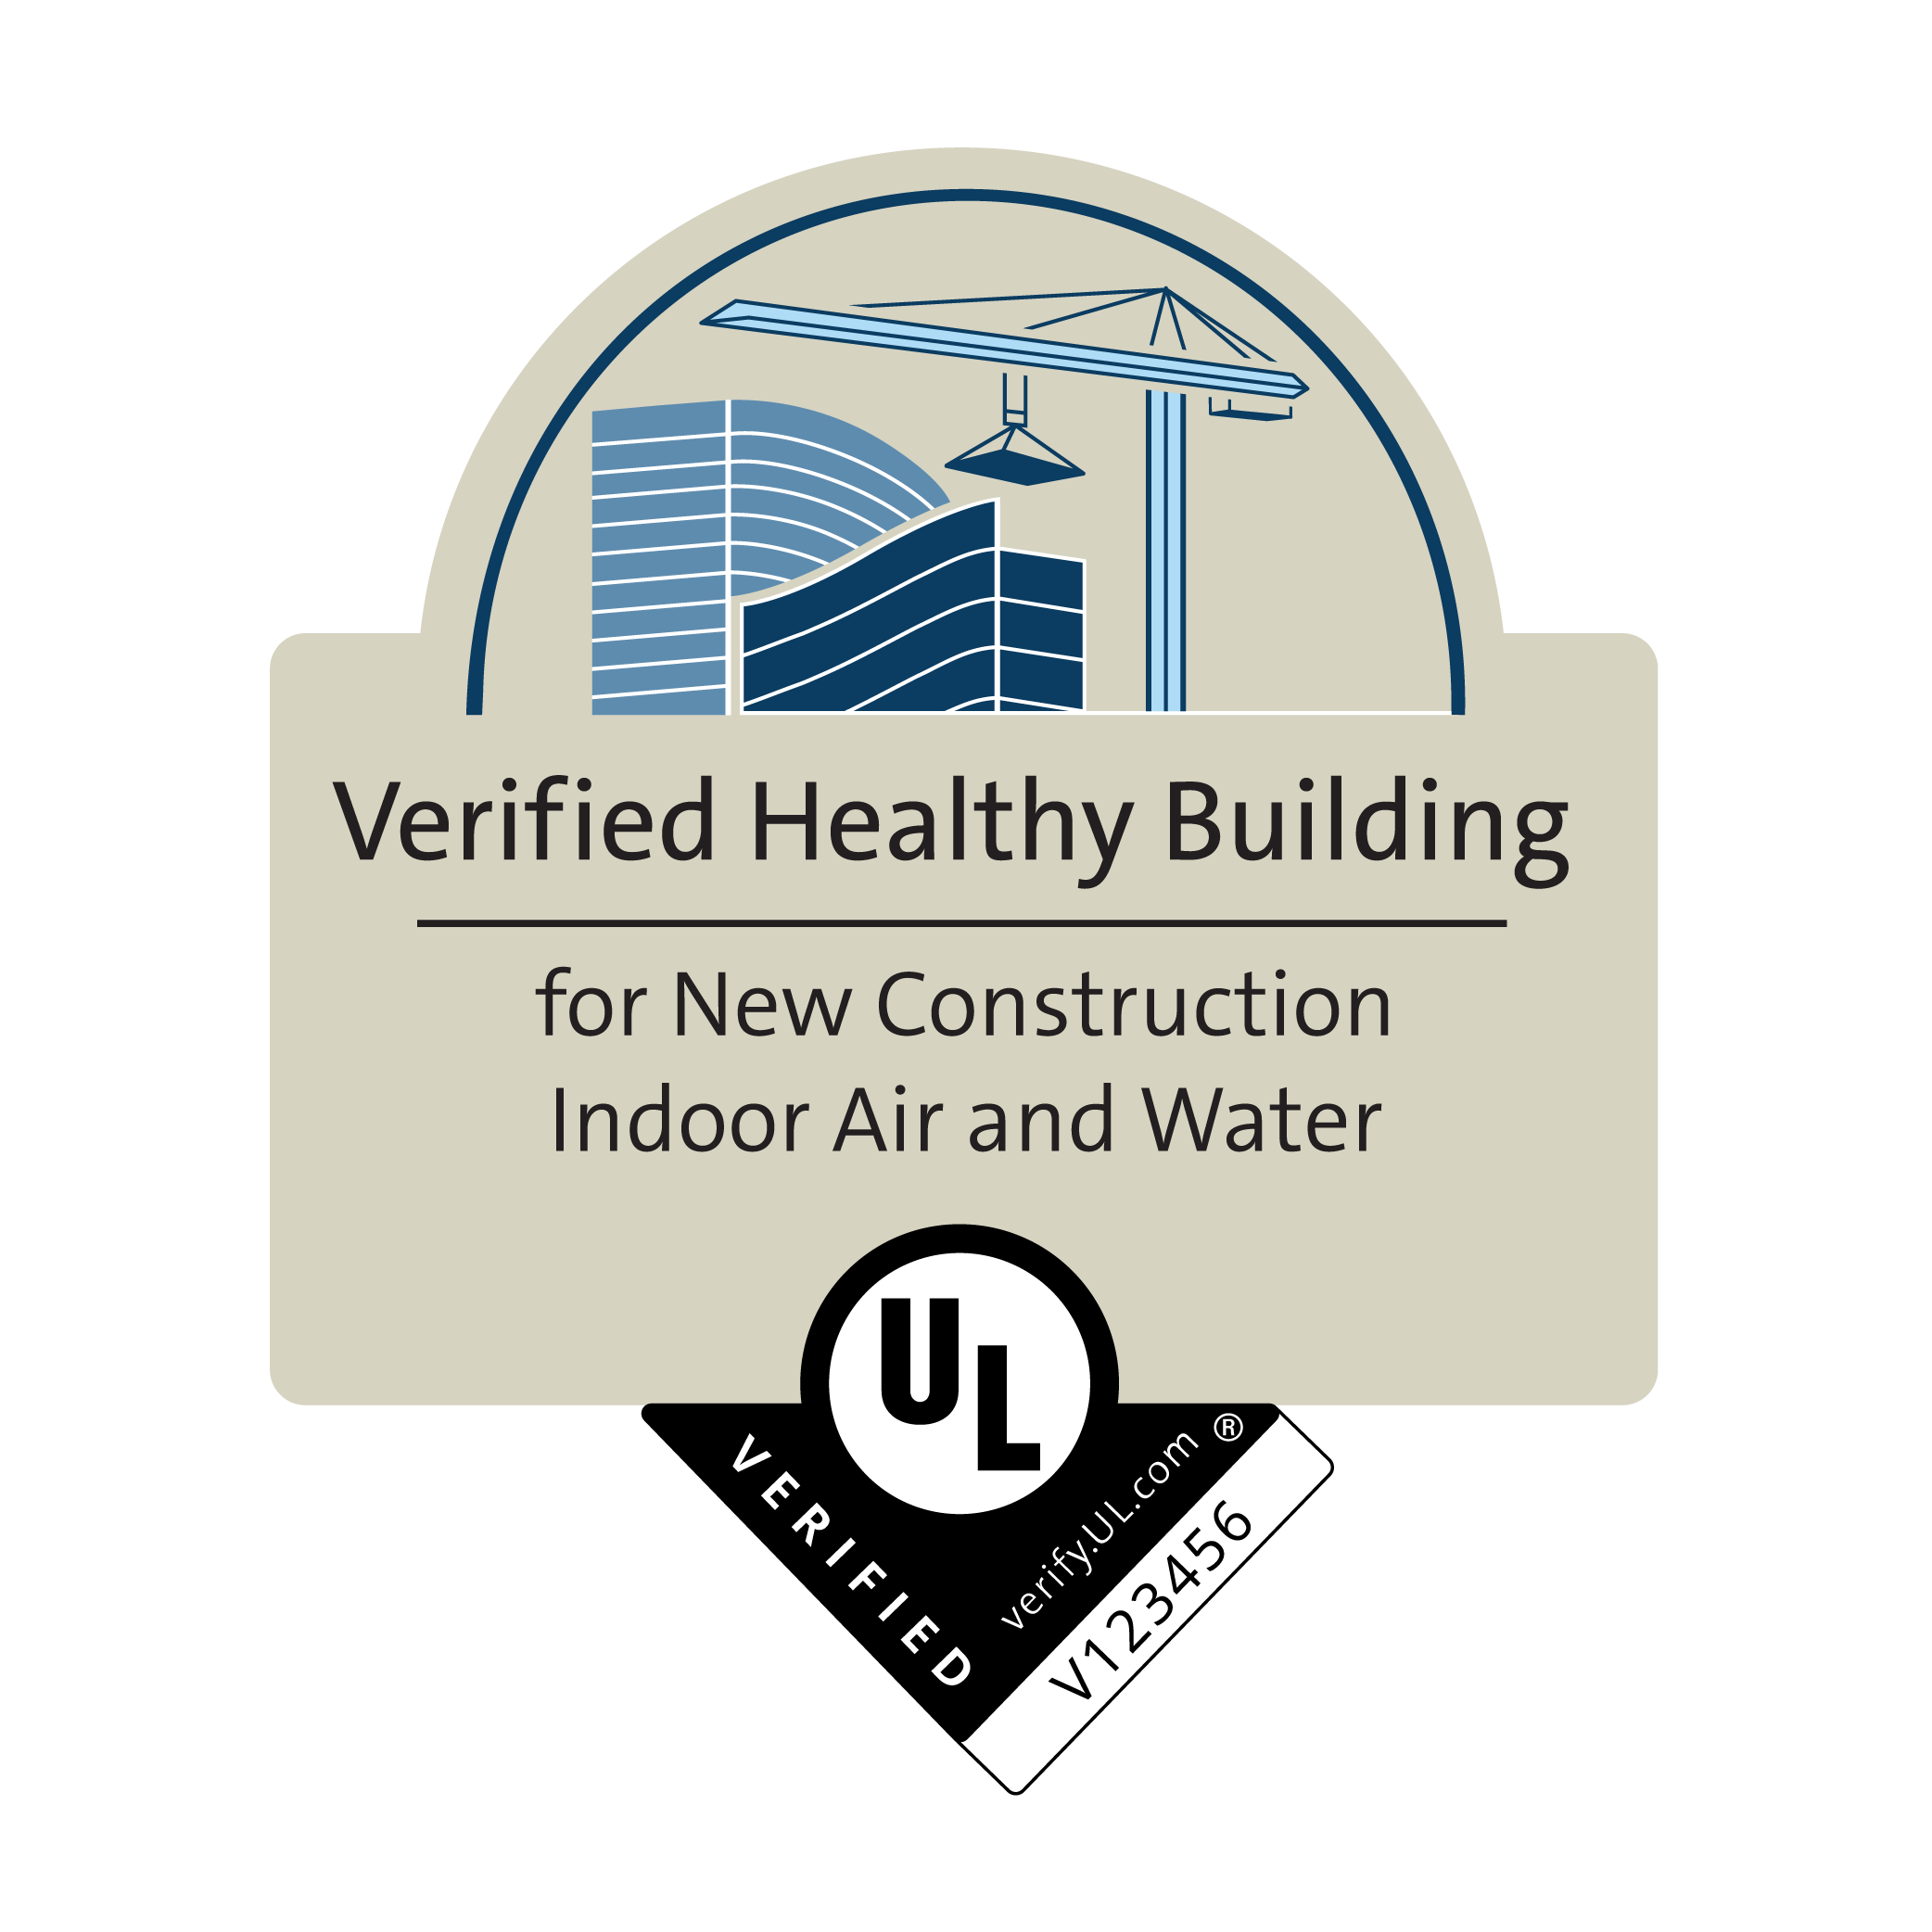 UL Verified Healthy Building for New Construction Indoor Air and Water; 新建築室內空氣與水質的 UL 健康建築驗證